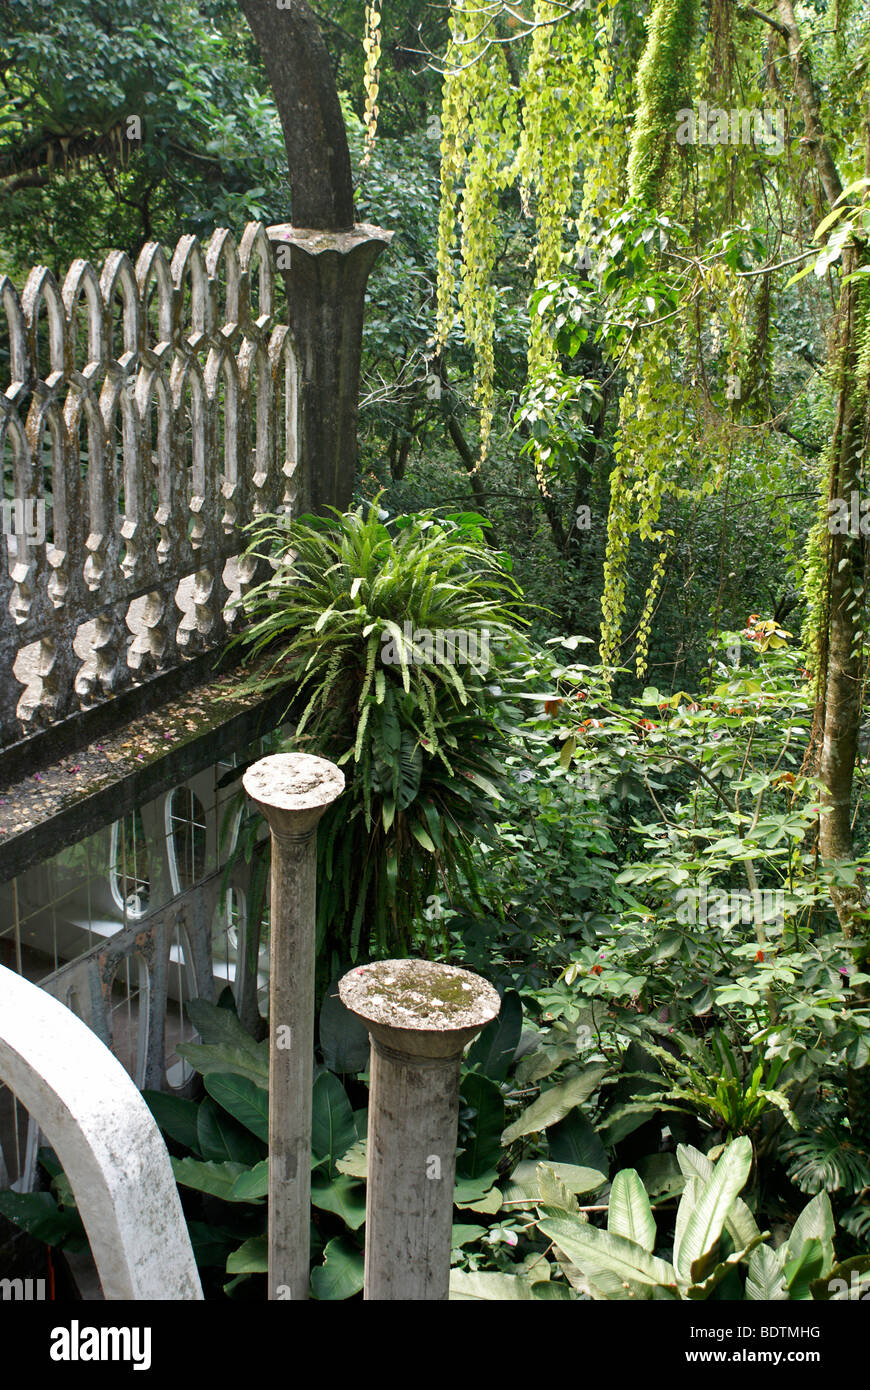 Cement structures at Las Pozas, the surrealistic sculpture garden created by Edward James near Xilitla, Mexico Stock Photo